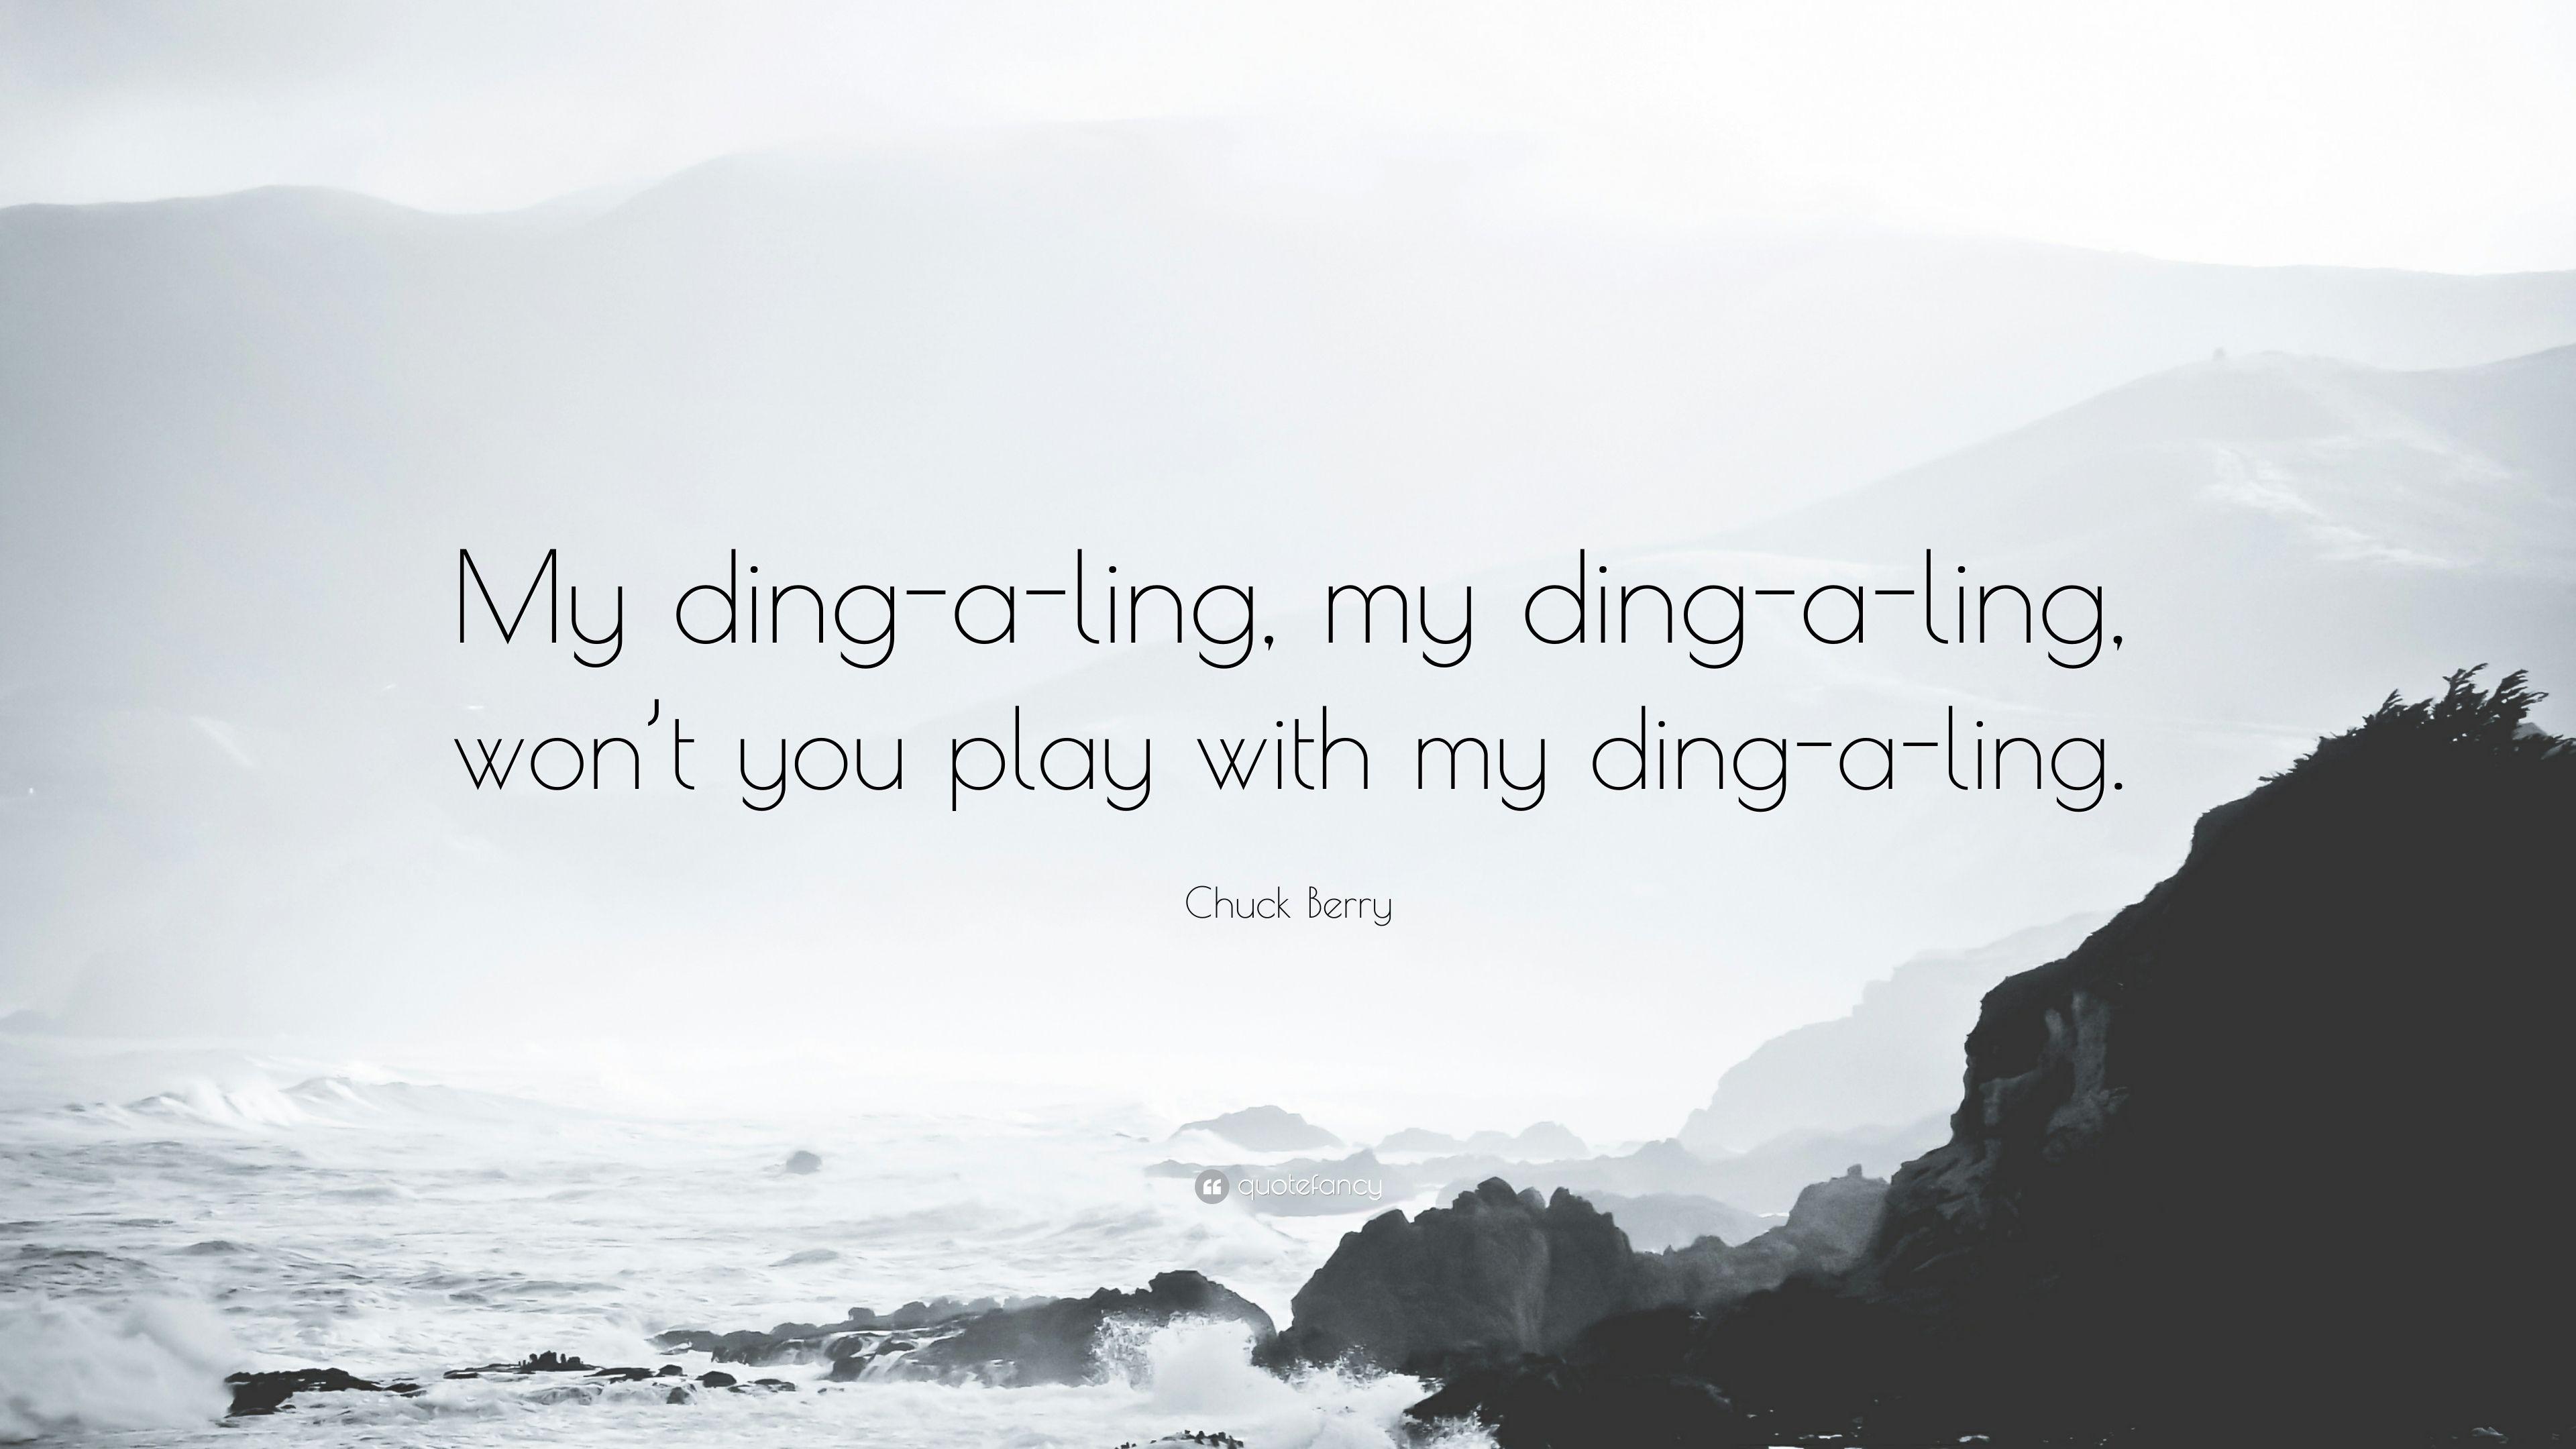 Chuck Berry Quote: “My Ding A Ling, My Ding A Ling, Won't You Play